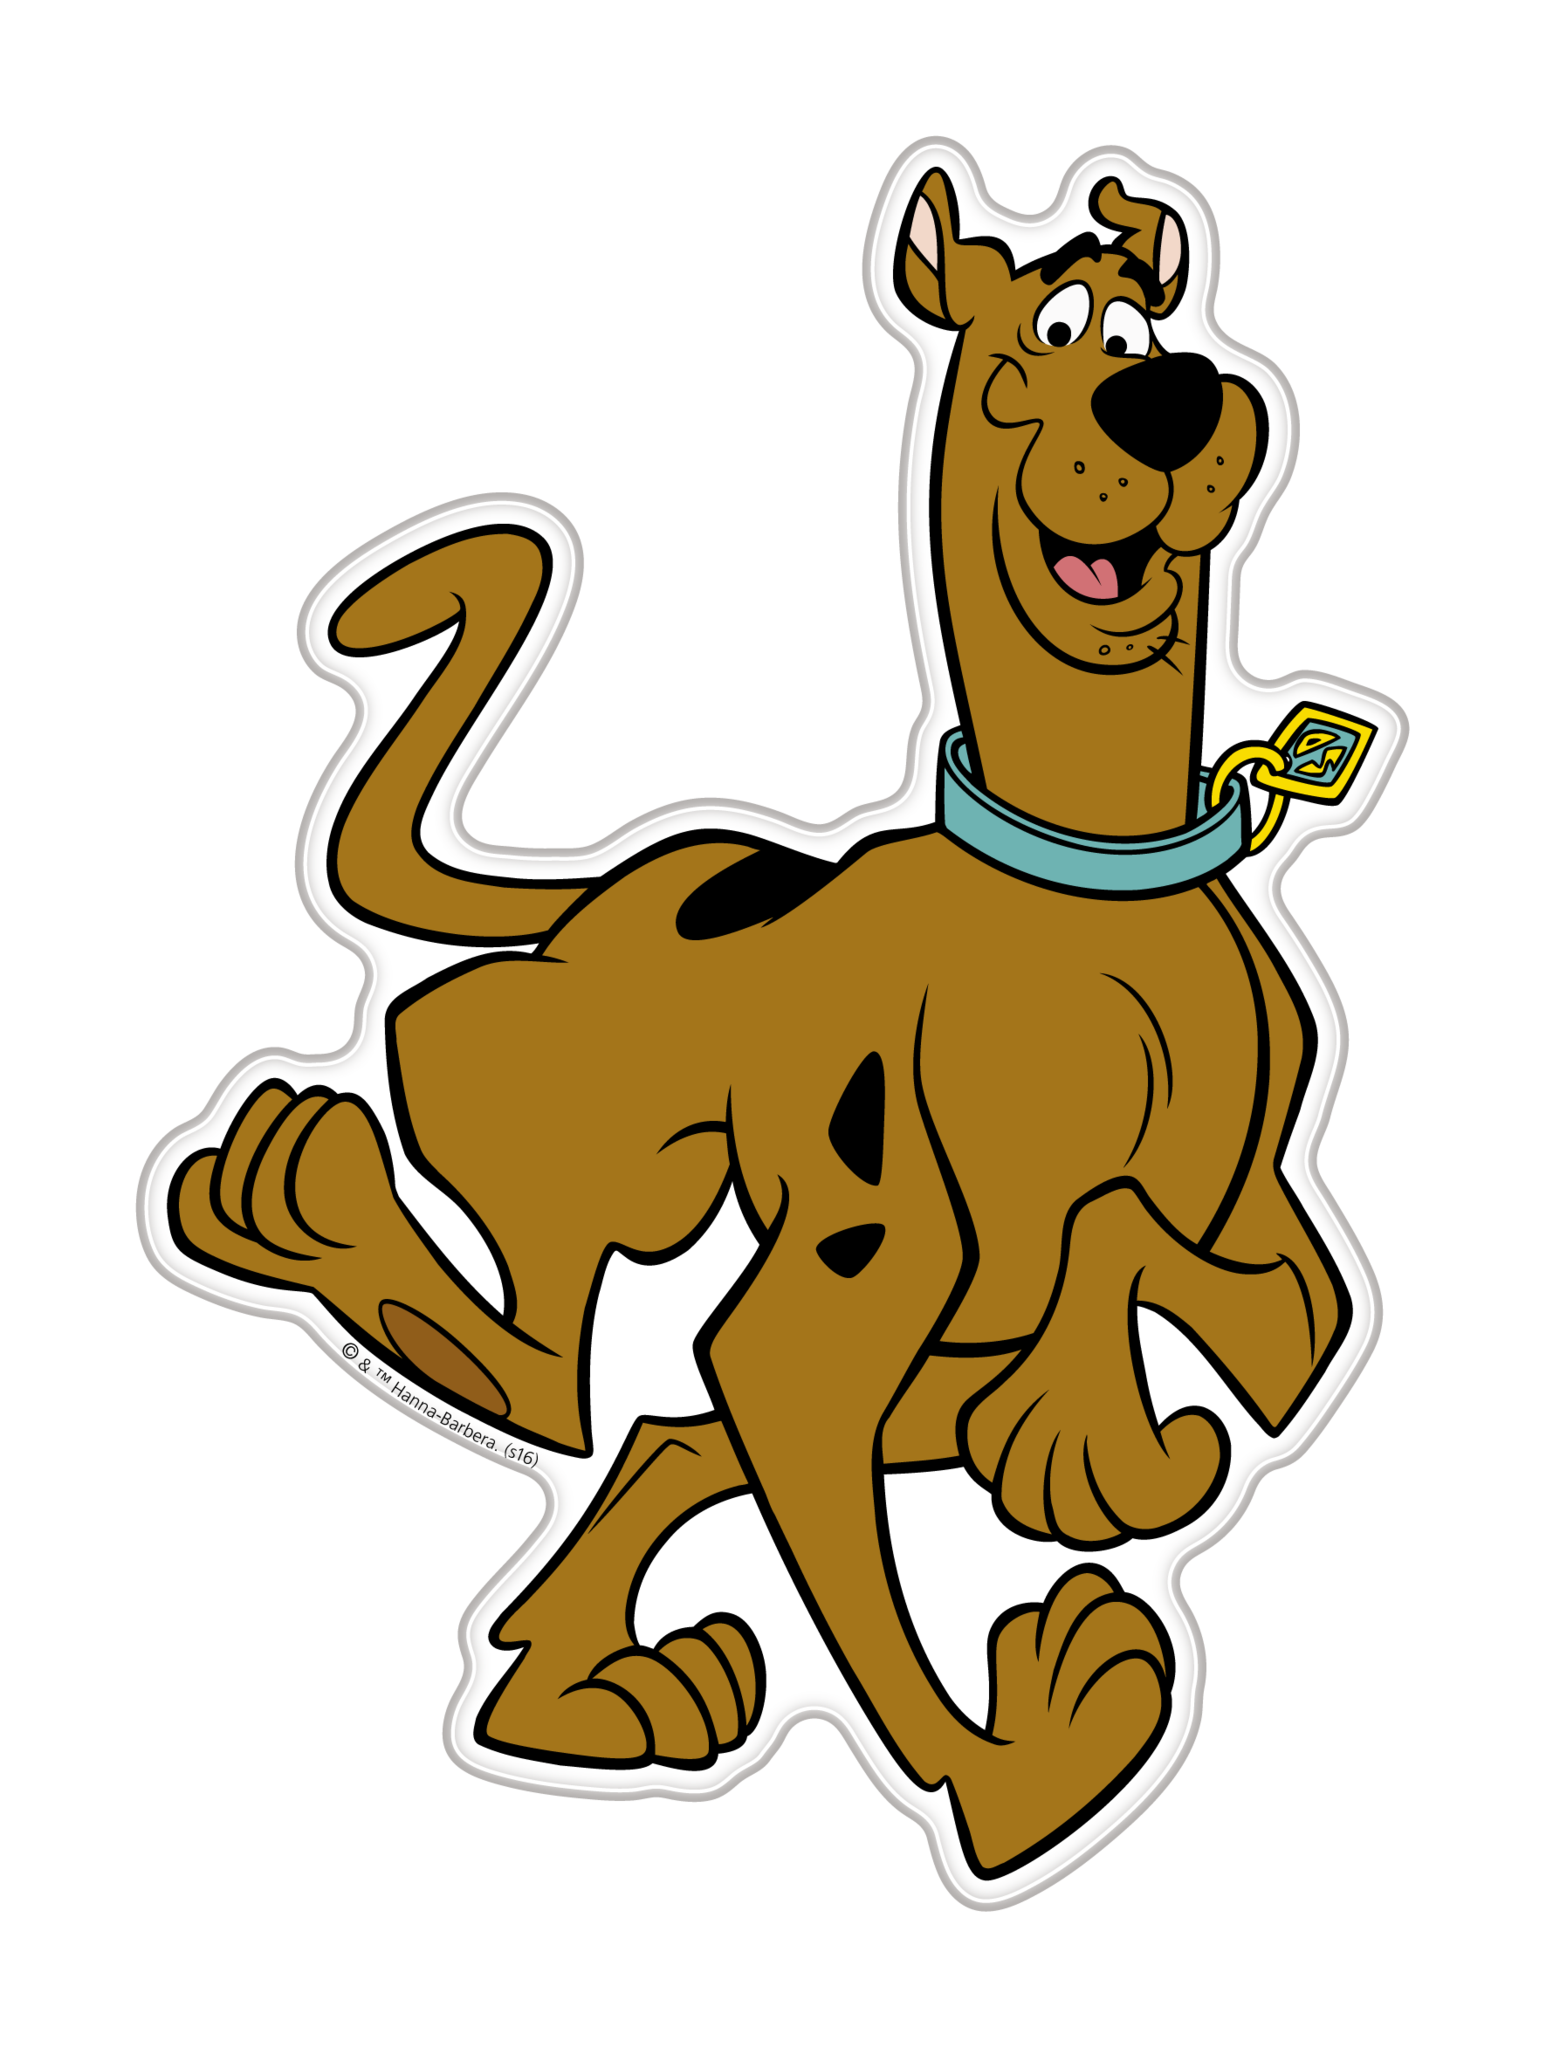 Scooby-Doo Premium Character Domed Logo Automotive Decal Sticker Badge Emblem